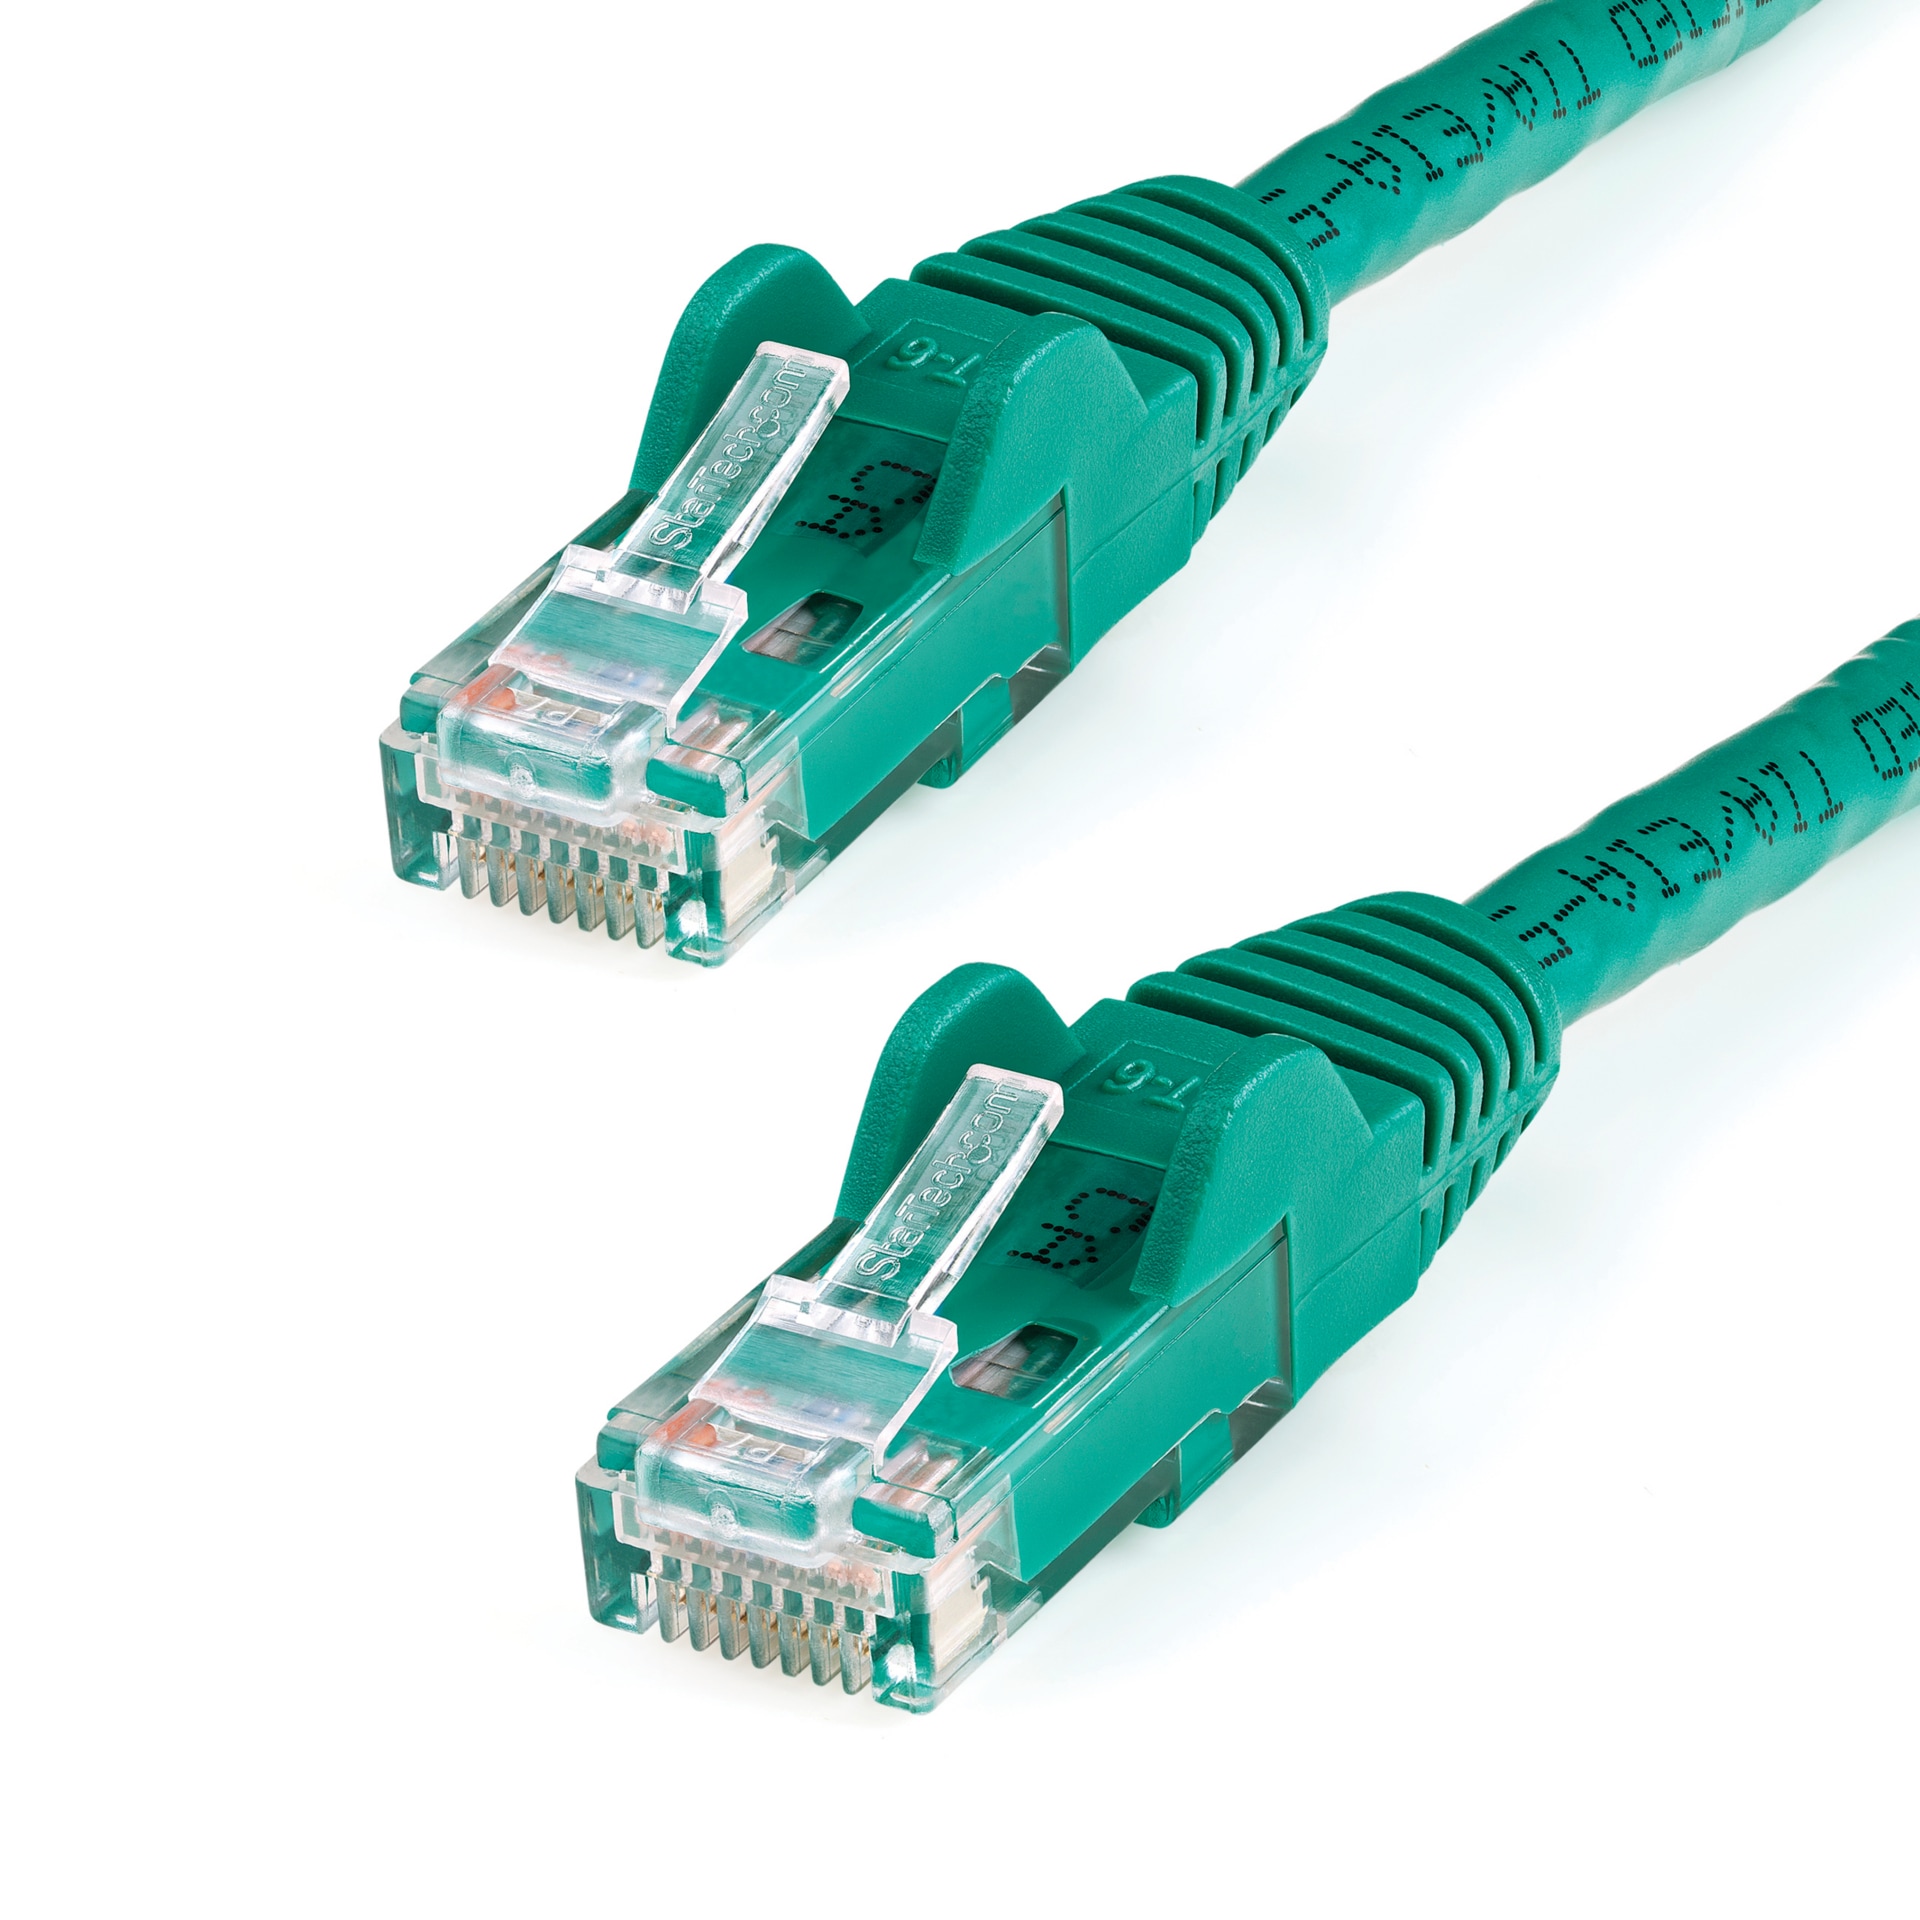 StarTech.com 25ft CAT6 Ethernet Cable Green Snagless UTP CAT 6 Gigabit Cord/Wire 100W PoE 650MHz